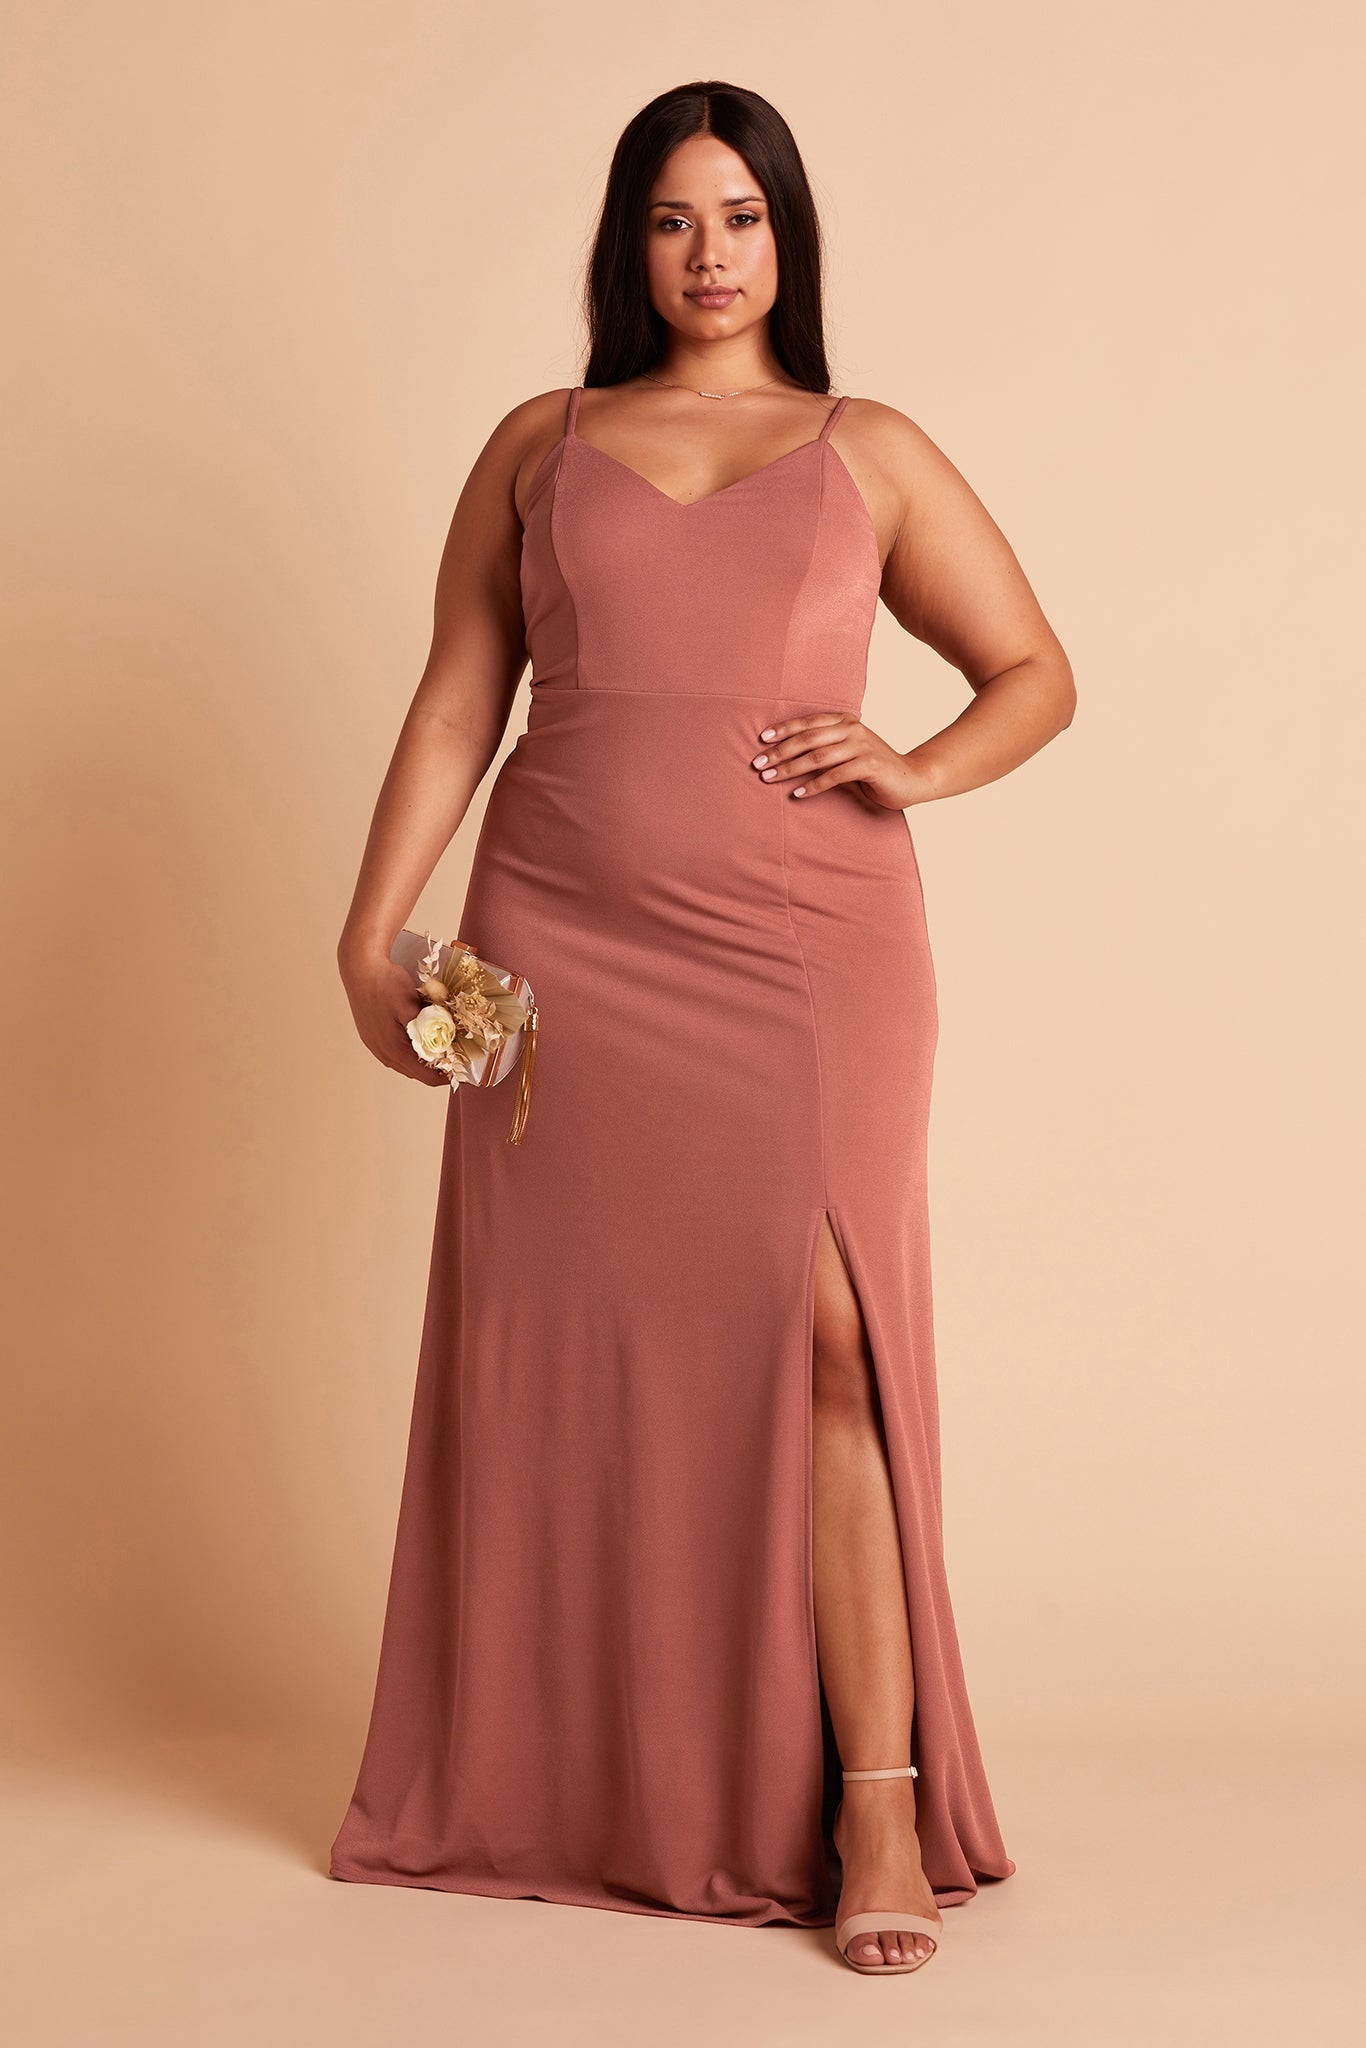 Jay plus size bridesmaid dress with slit in desert rose crepe by Birdy Grey, front view